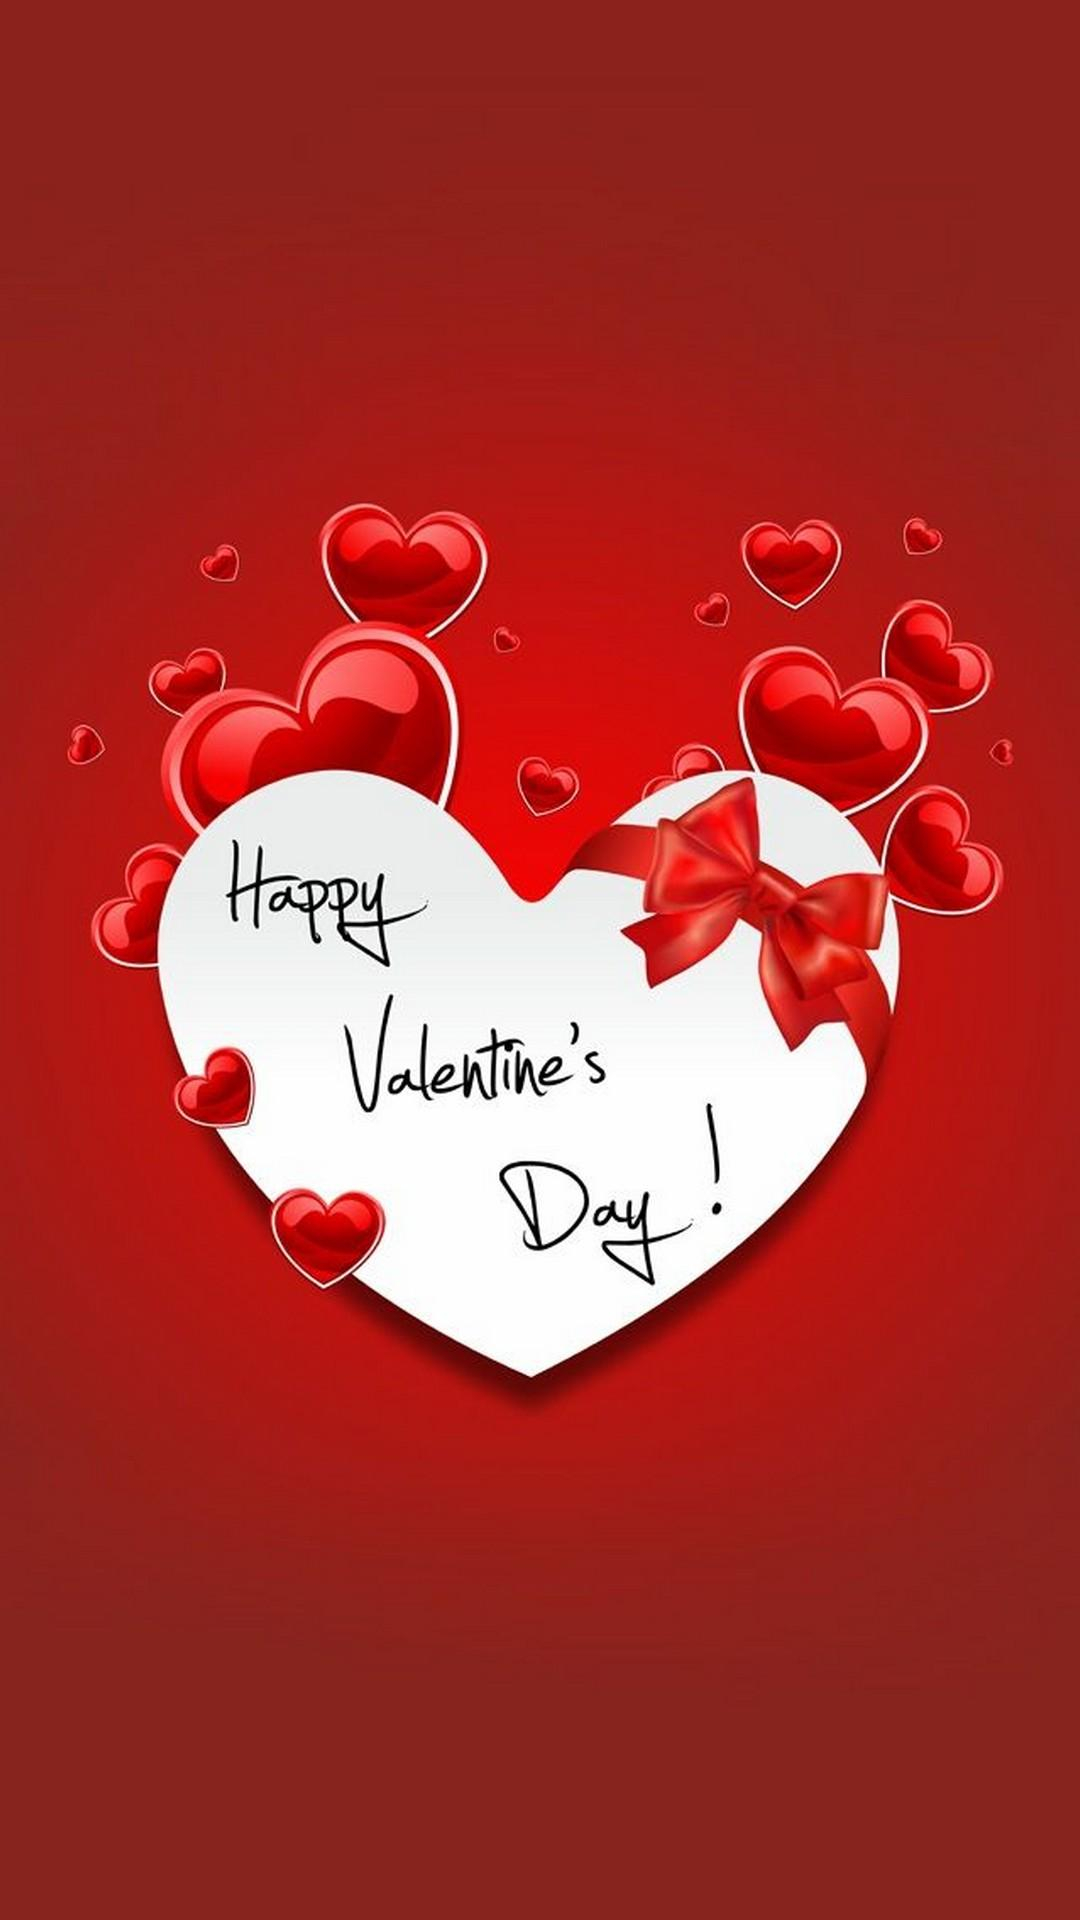 1080x1920 Valentine's Day Android Wallpapers